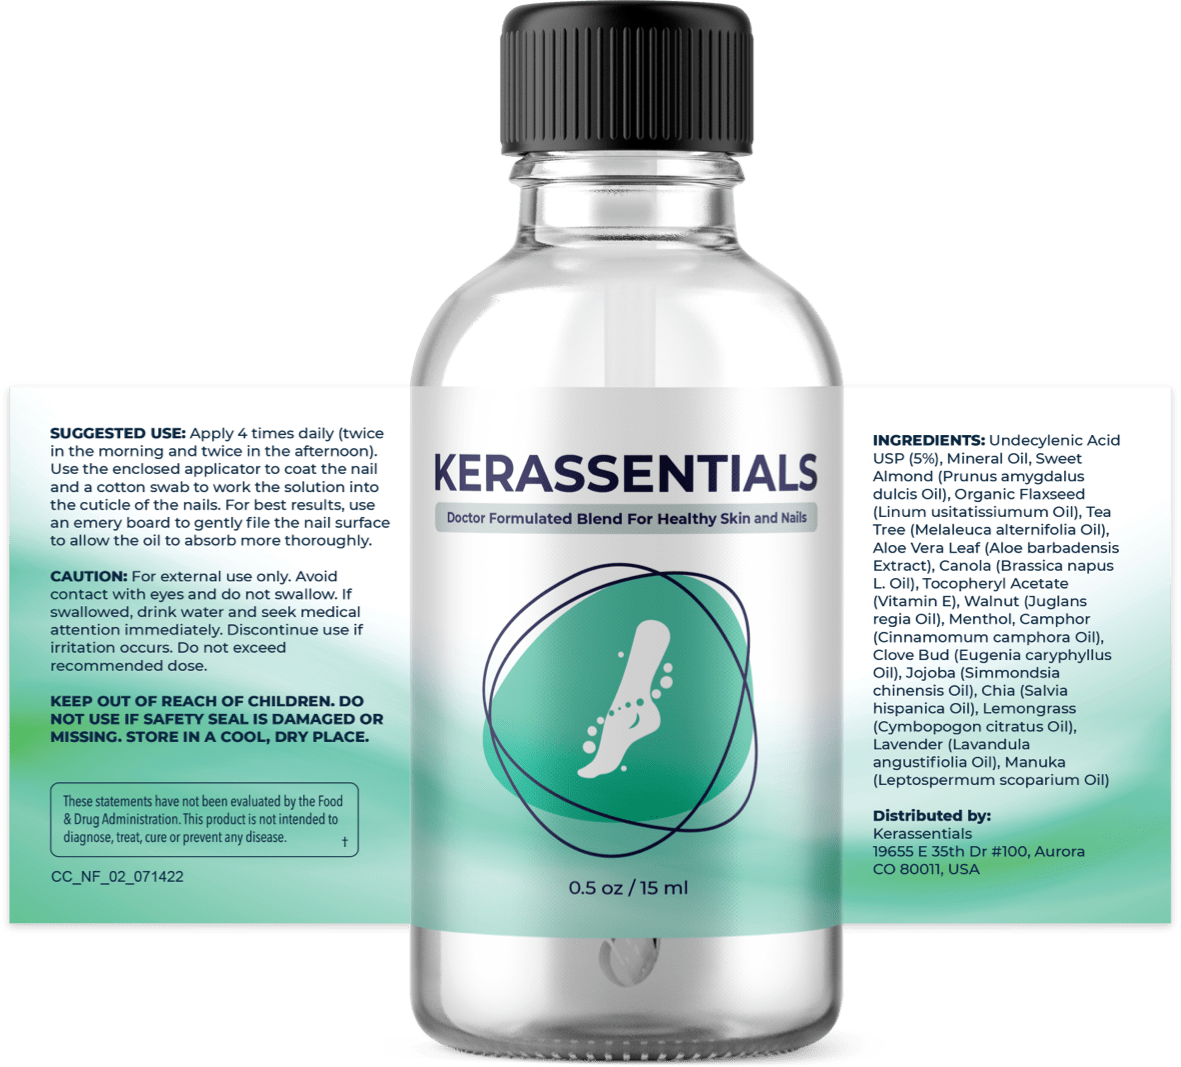 Kerassentials ingredients: natural oils and antioxidants nourish and revitalize skin and nails